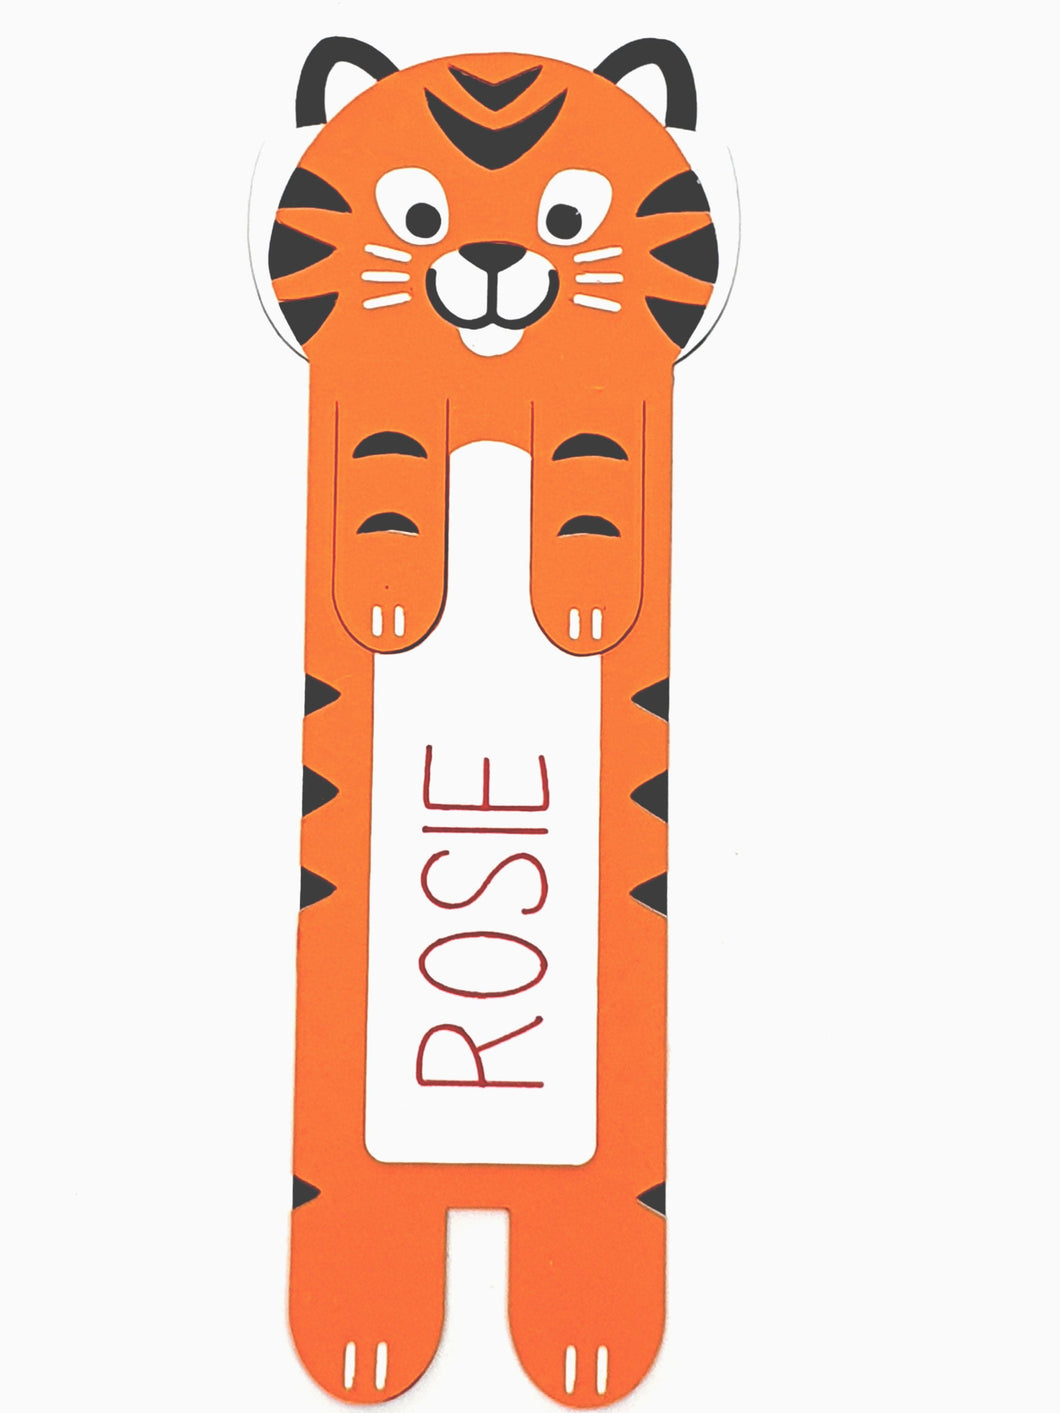 Bookmark Child's Personalised Animal Design Handmade Choice of 4 Animals Harbourside Gifts